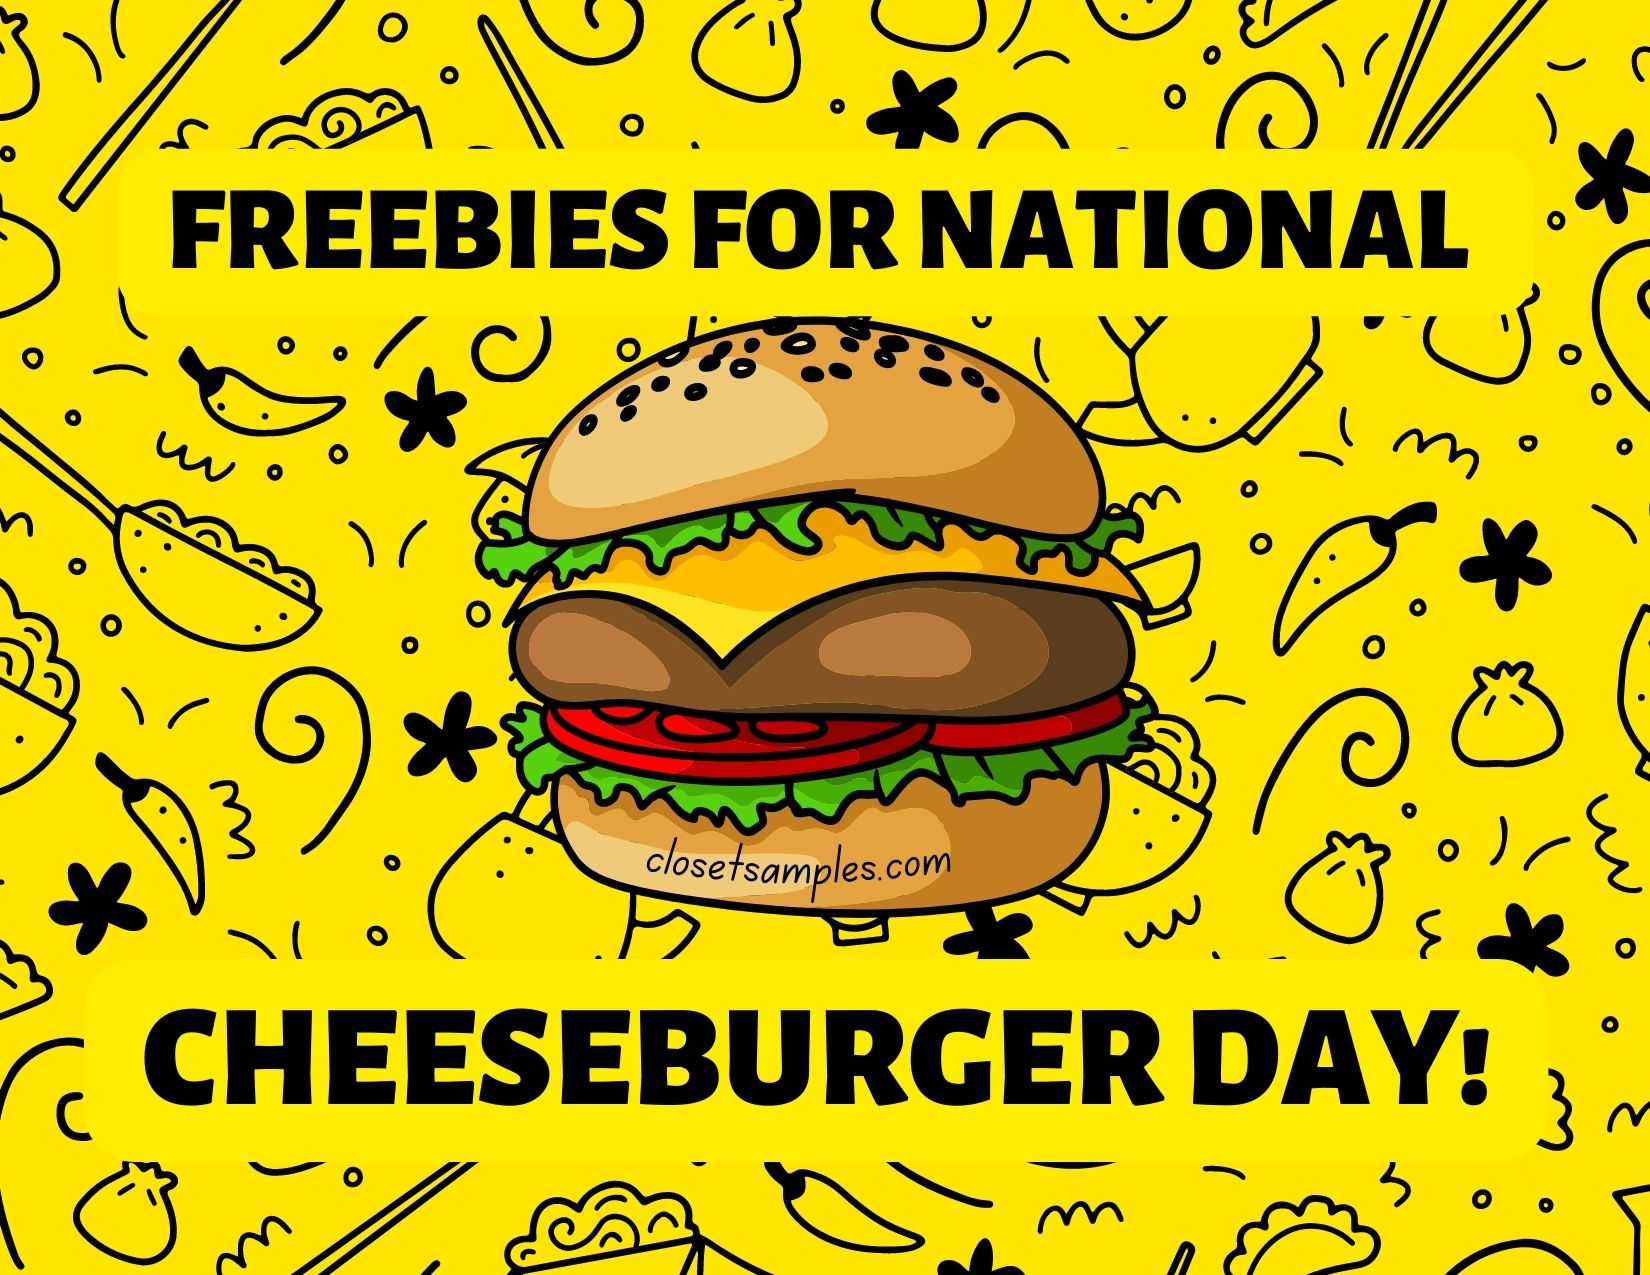 FREE Sandwiches for National Cheeseburger Day closetsamples